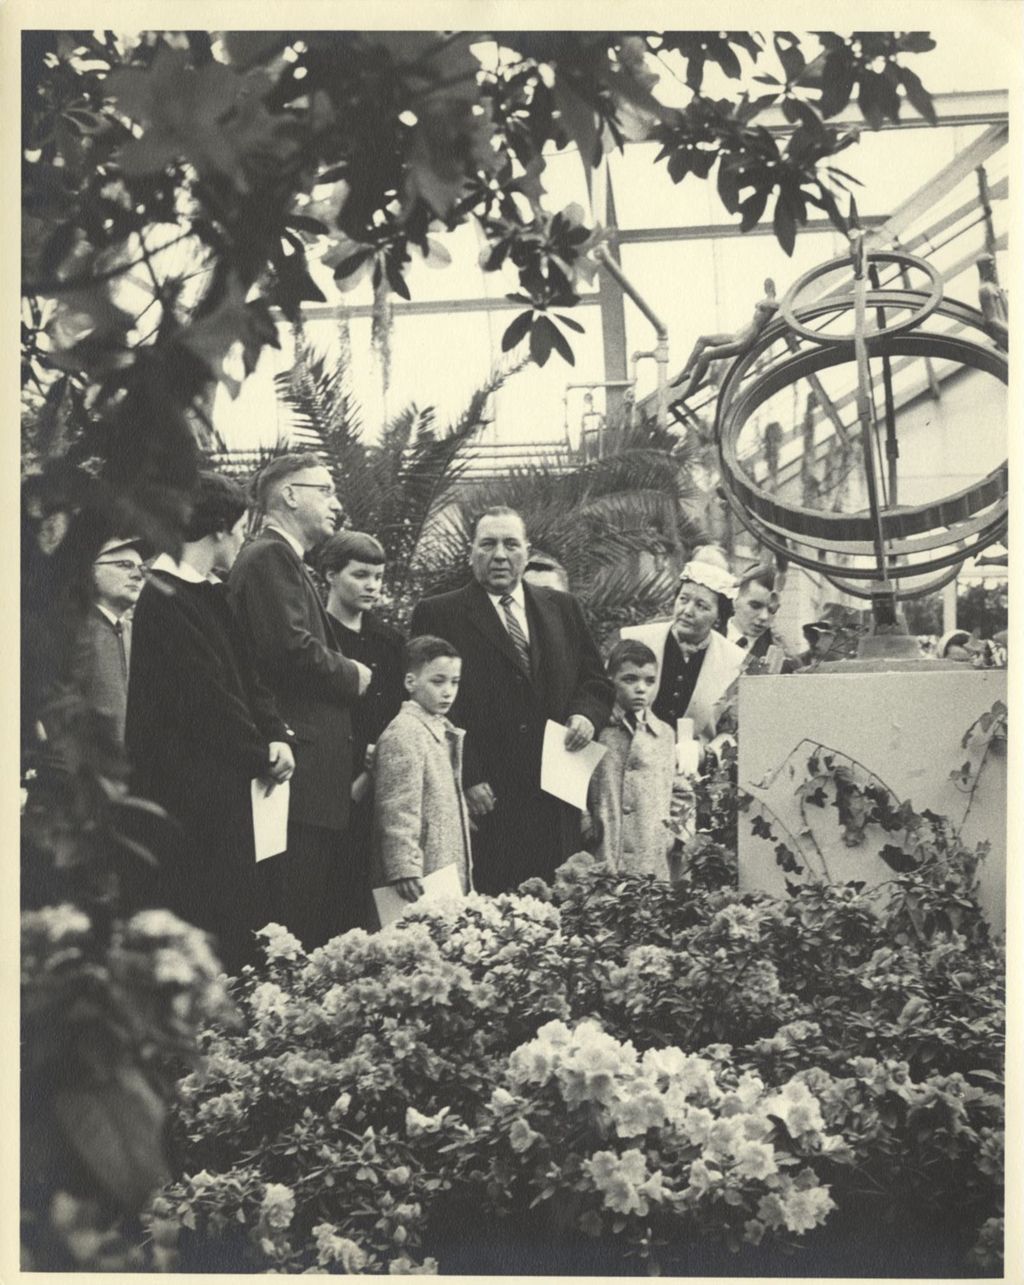 Miniature of Daley family at a flower show